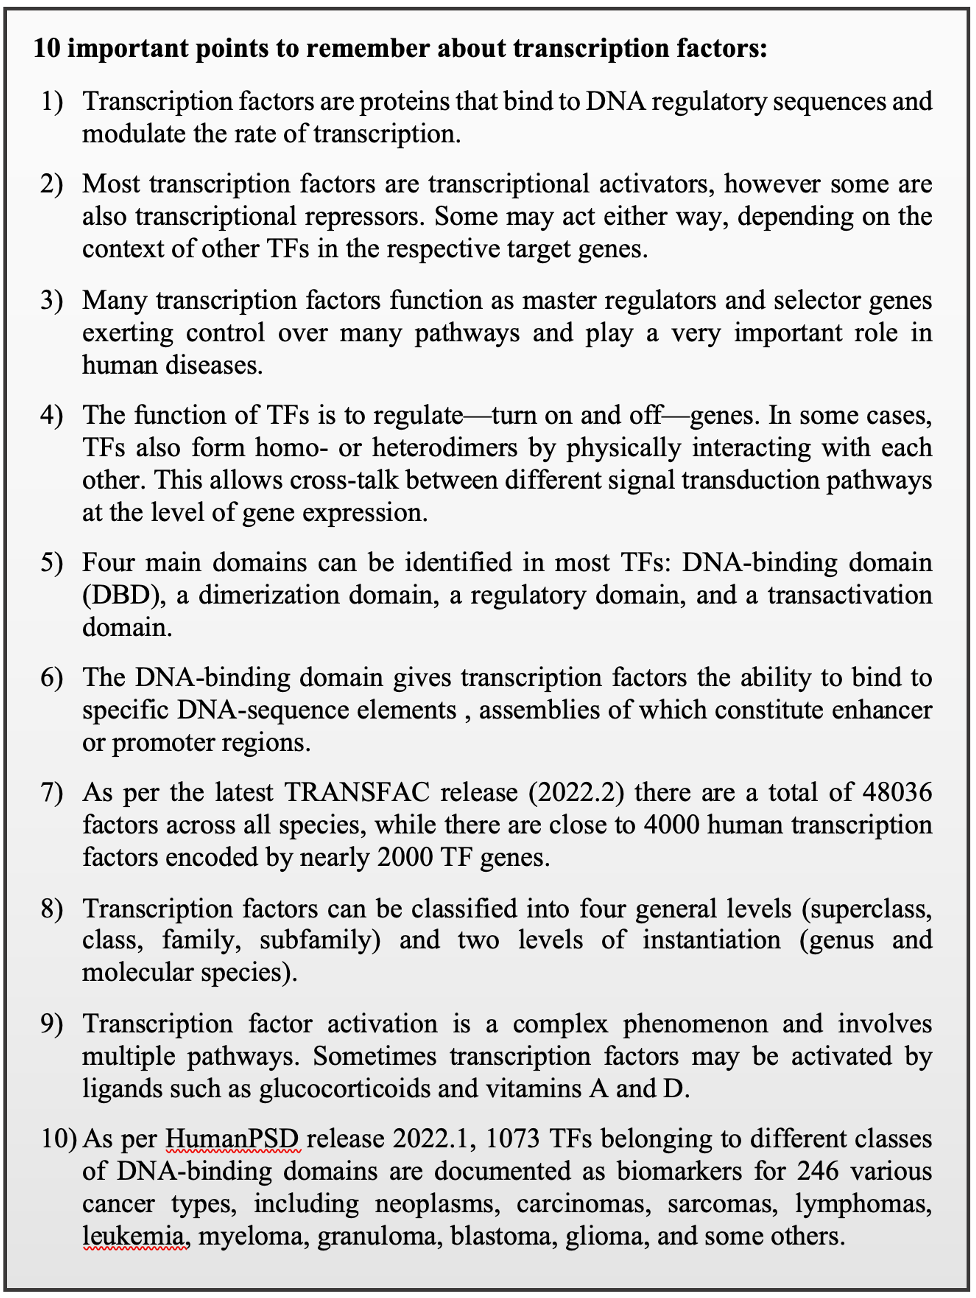 10 important points to remember about transcription factors: 1) Transcription factors are proteins that bind to DNA regulatory sequences and modulate the rate of transcription. 2) Most transcription factors are transcriptional activators, however some are also transcriptional repressors. Some may act either way, depending on the context of other TFs in the respective target genes. 3) Many transcription factors function as master regulators and selector genes exerting control over many pathways and play a very important role in human diseases. 4) The function of TFs is to regulate—turn on and off—genes. In some cases, TFs also form homo- or heterodimers by physically interacting with each other. This allows cross-talk between different signal transduction pathways at the level of gene expression. 5) Four main domains can be identified in most TFs: DNA-binding domain (DBD), a dimerization domain, a regulatory domain, and a transactivation domain. 6) The DNA-binding domain gives transcription factors the ability to bind to specific DNA-sequence elements , assemblies of which constitute enhancer or promoter regions. 7) As per the latest TRANSFAC release (2022.2) there are a total of 48036 factors across all species, while there are close to 4000 human transcription factors encoded by nearly 2000 TF genes. 8) Transcription factors can be classified into four general levels (superclass, class, family, subfamily) and two levels of instantiation (genus and molecular species). 9) Transcription factor activation is a complex phenomenon and involves multiple pathways. Sometimes transcription factors may be activated by ligands such as glucocorticoids and vitamins A and D. 10) As per HumanPSD release 2022.1, 1073 TFs belonging to different classes of DNA-binding domains are documented as biomarkers for 246 various cancer types, including neoplasms, carcinomas, sarcomas, lymphomas, leukemia, myeloma, granuloma, blastoma, glioma, and some others.